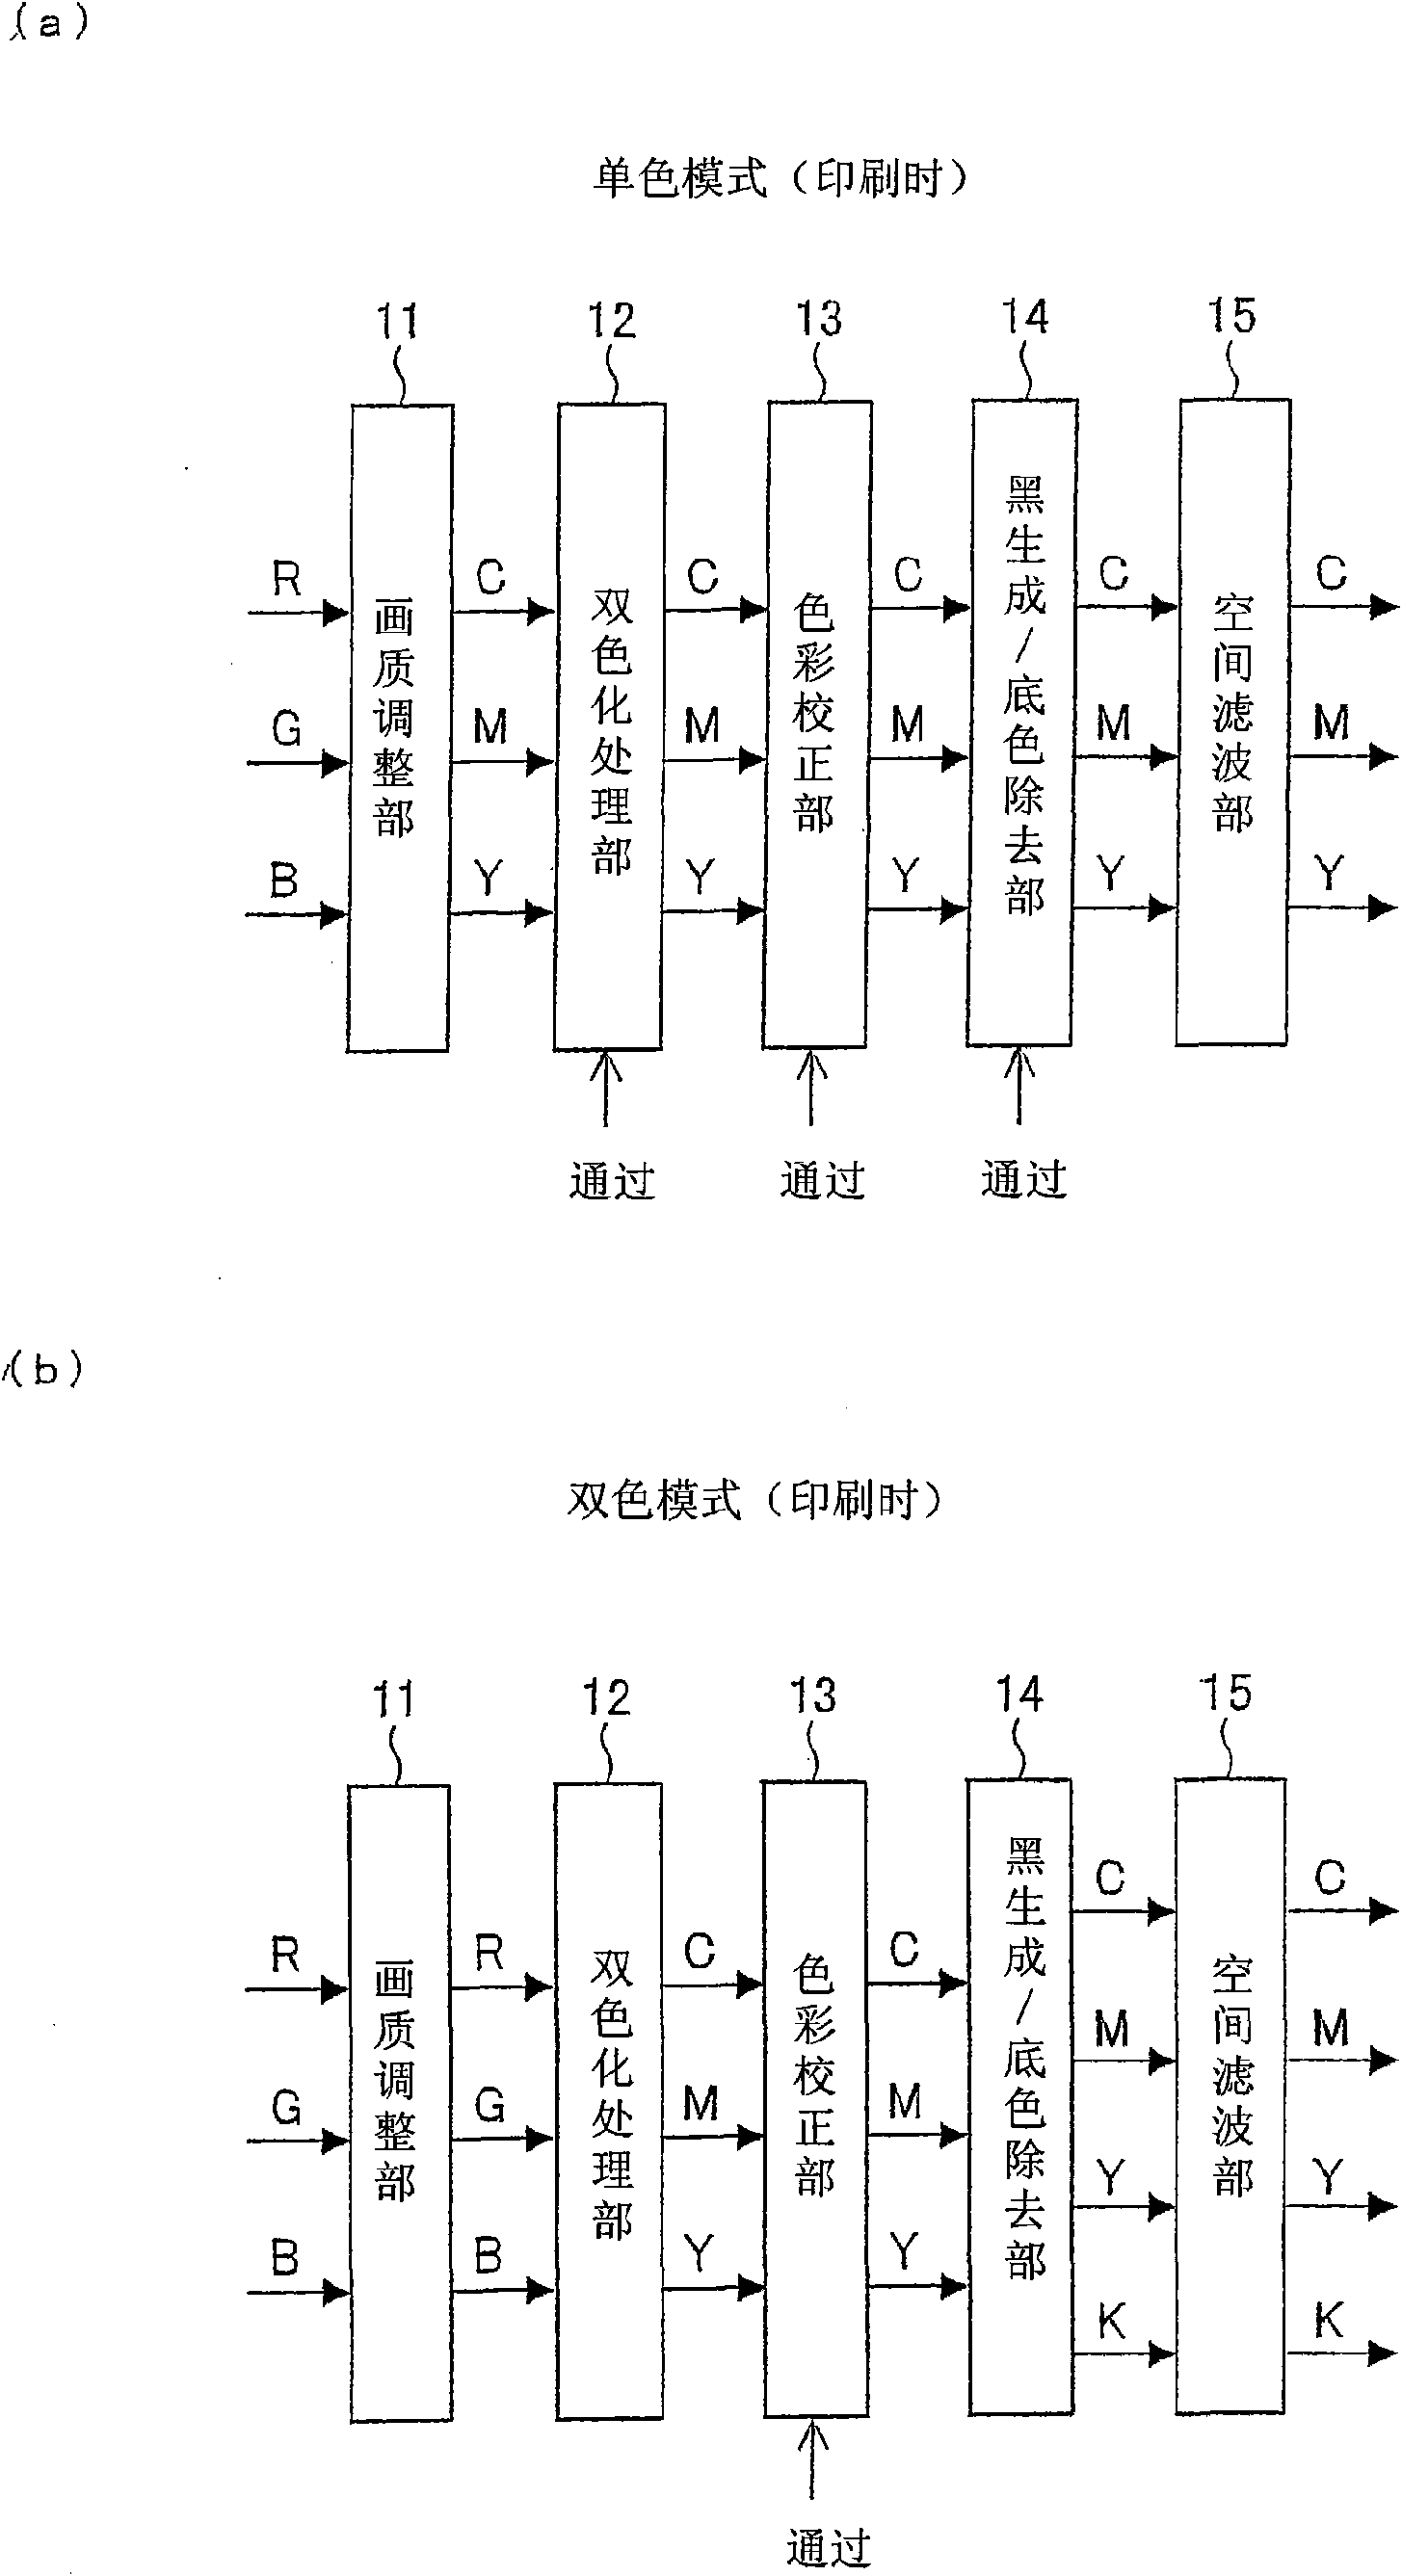 Image processing apparatus, image forming apparatus and image processing method